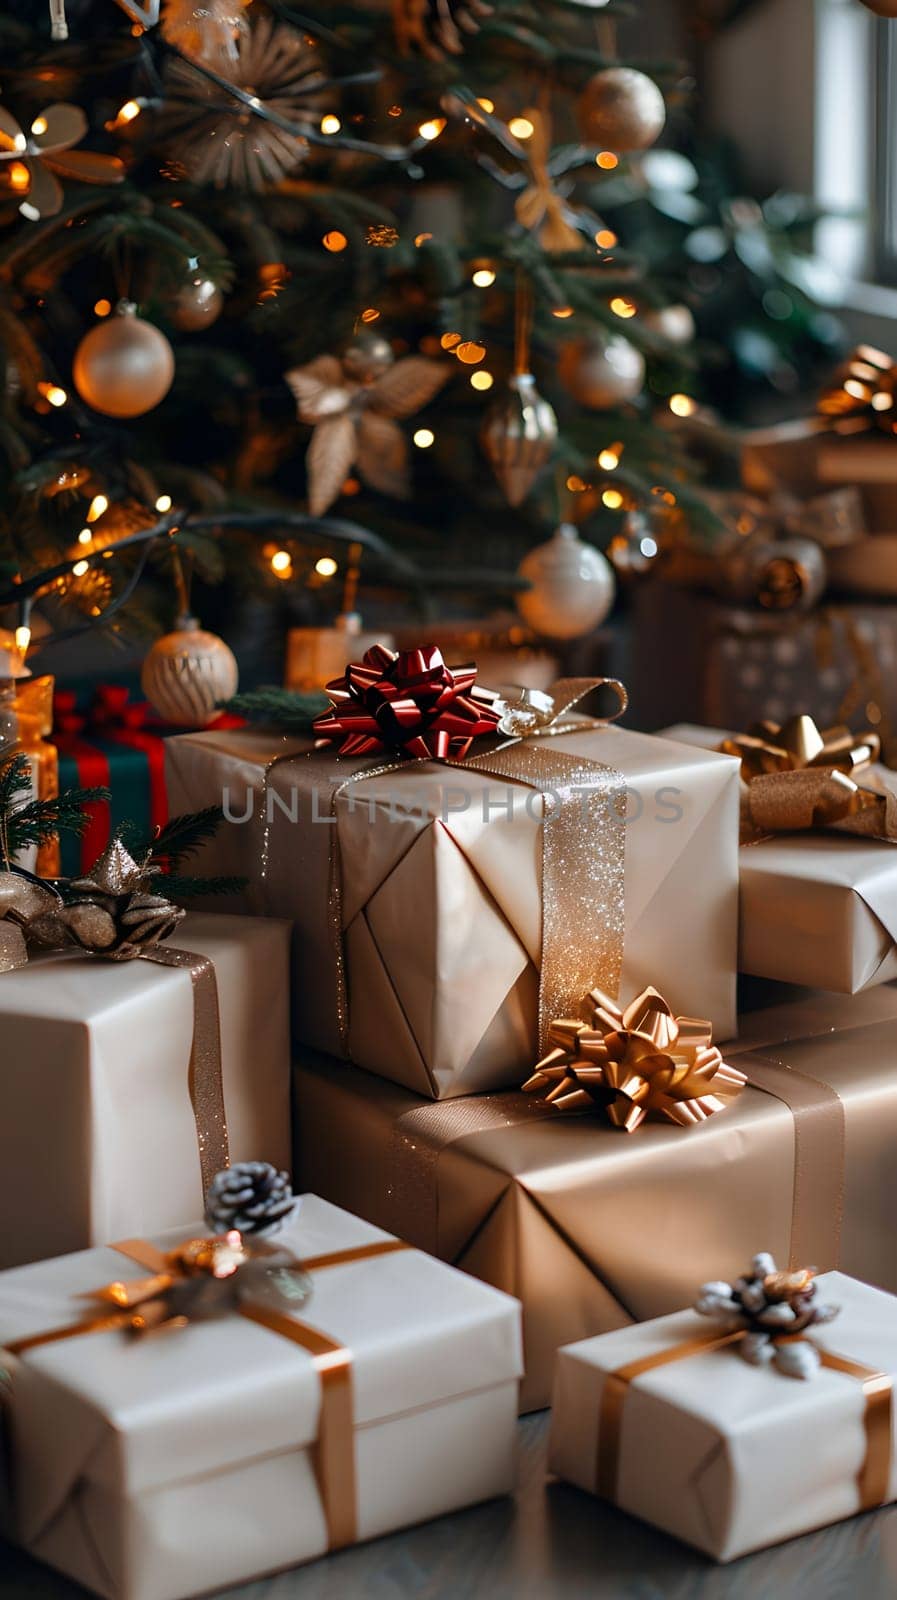 A stack of Christmas gifts nestled beneath a beautifully decorated Christmas tree, surrounded by festive ornaments and holiday decorations